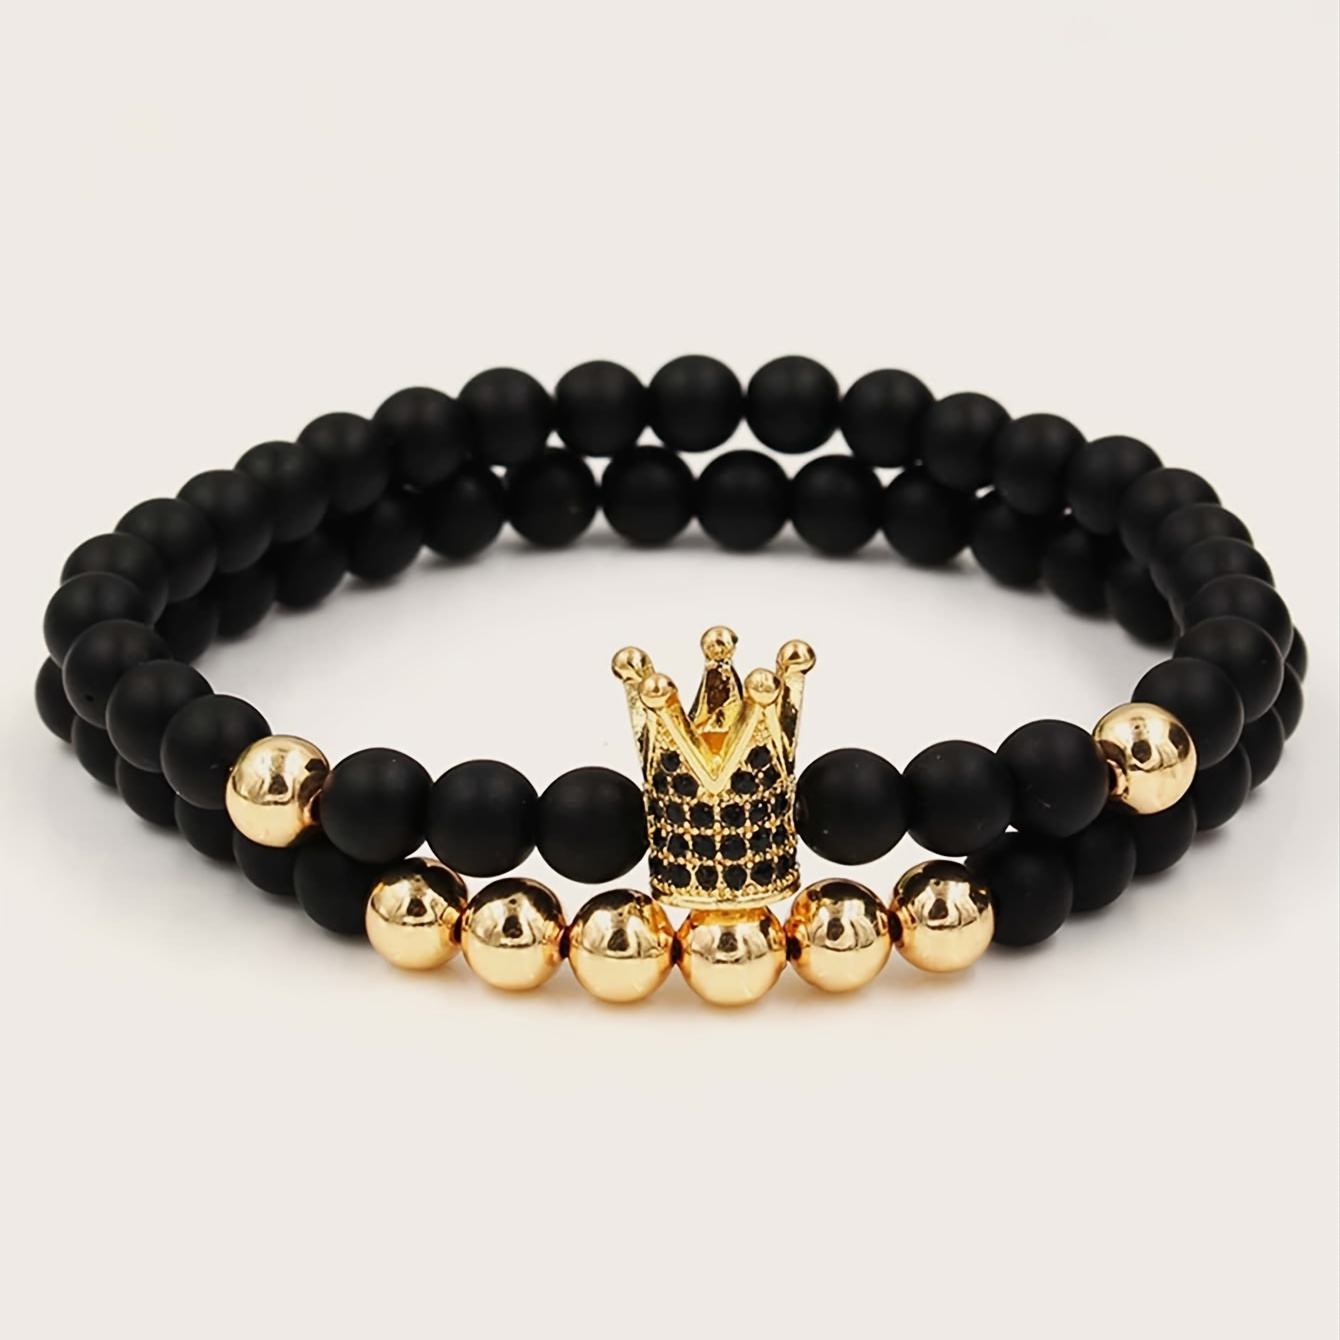 

2pcs/set Creative Men's Geometric Bracelet With Frosted Stone And Crown